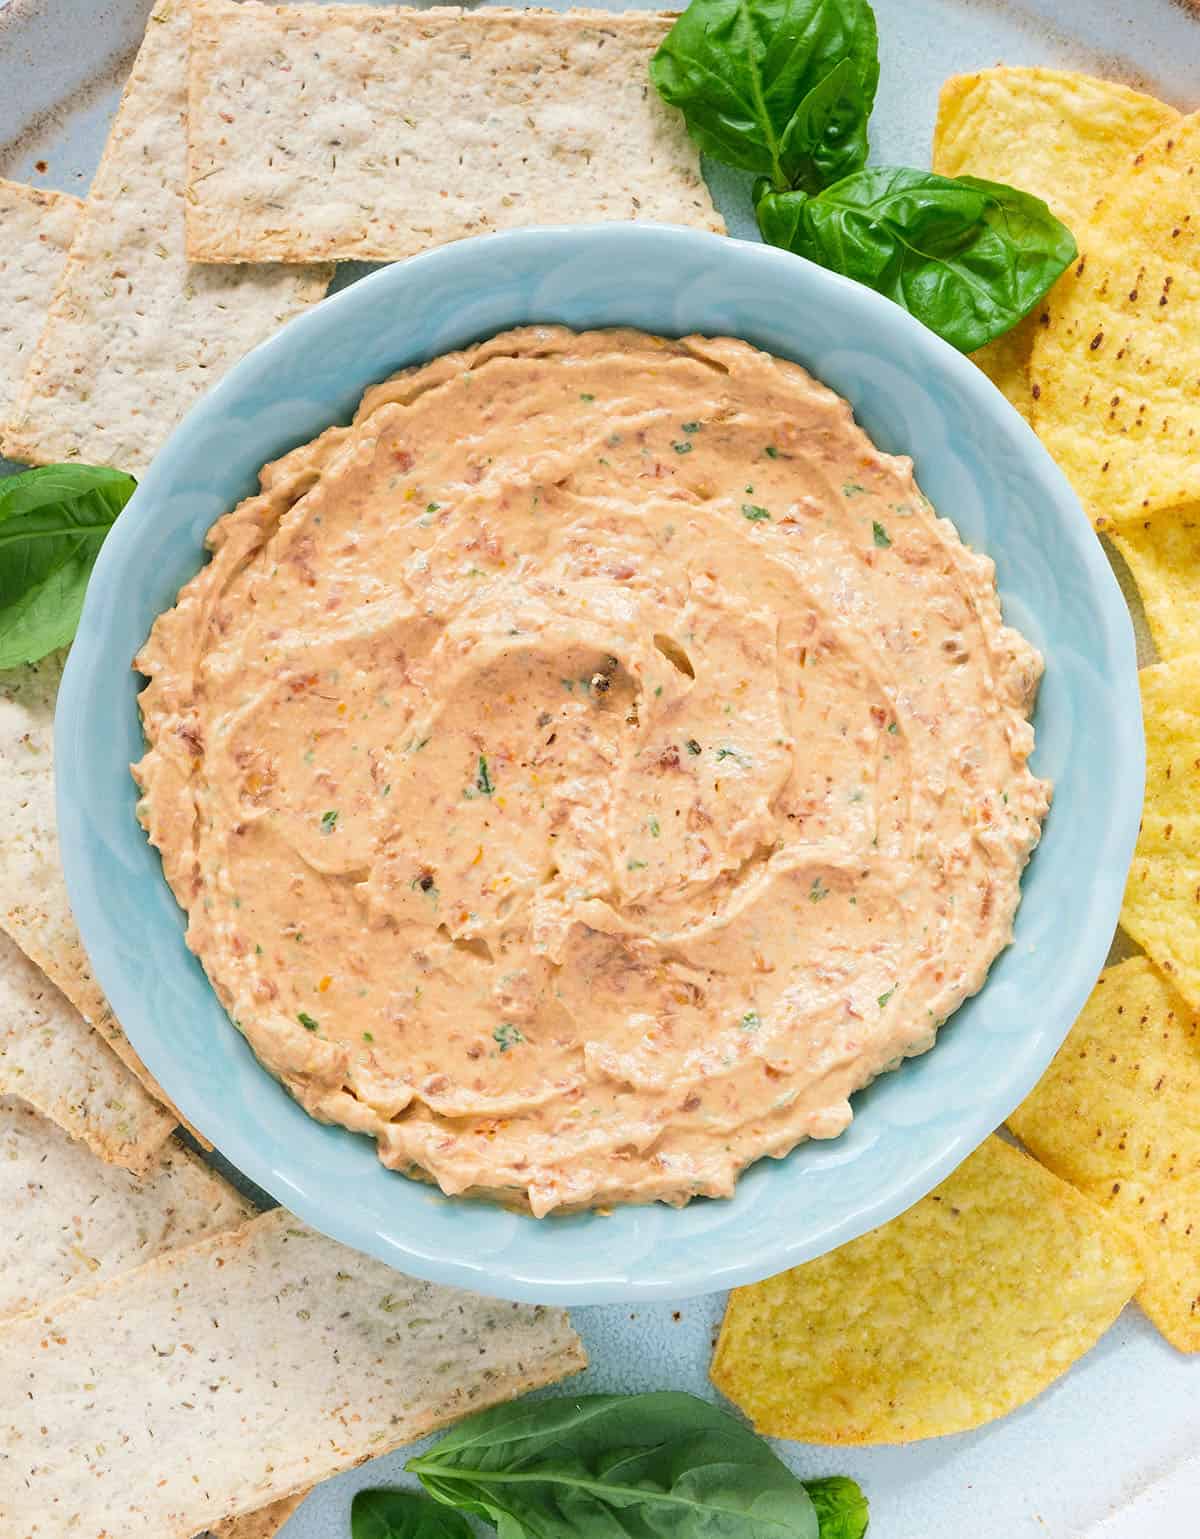 Top view of a turquoise bowl full of sun dried tomato cream cheese served with tortilla chips.